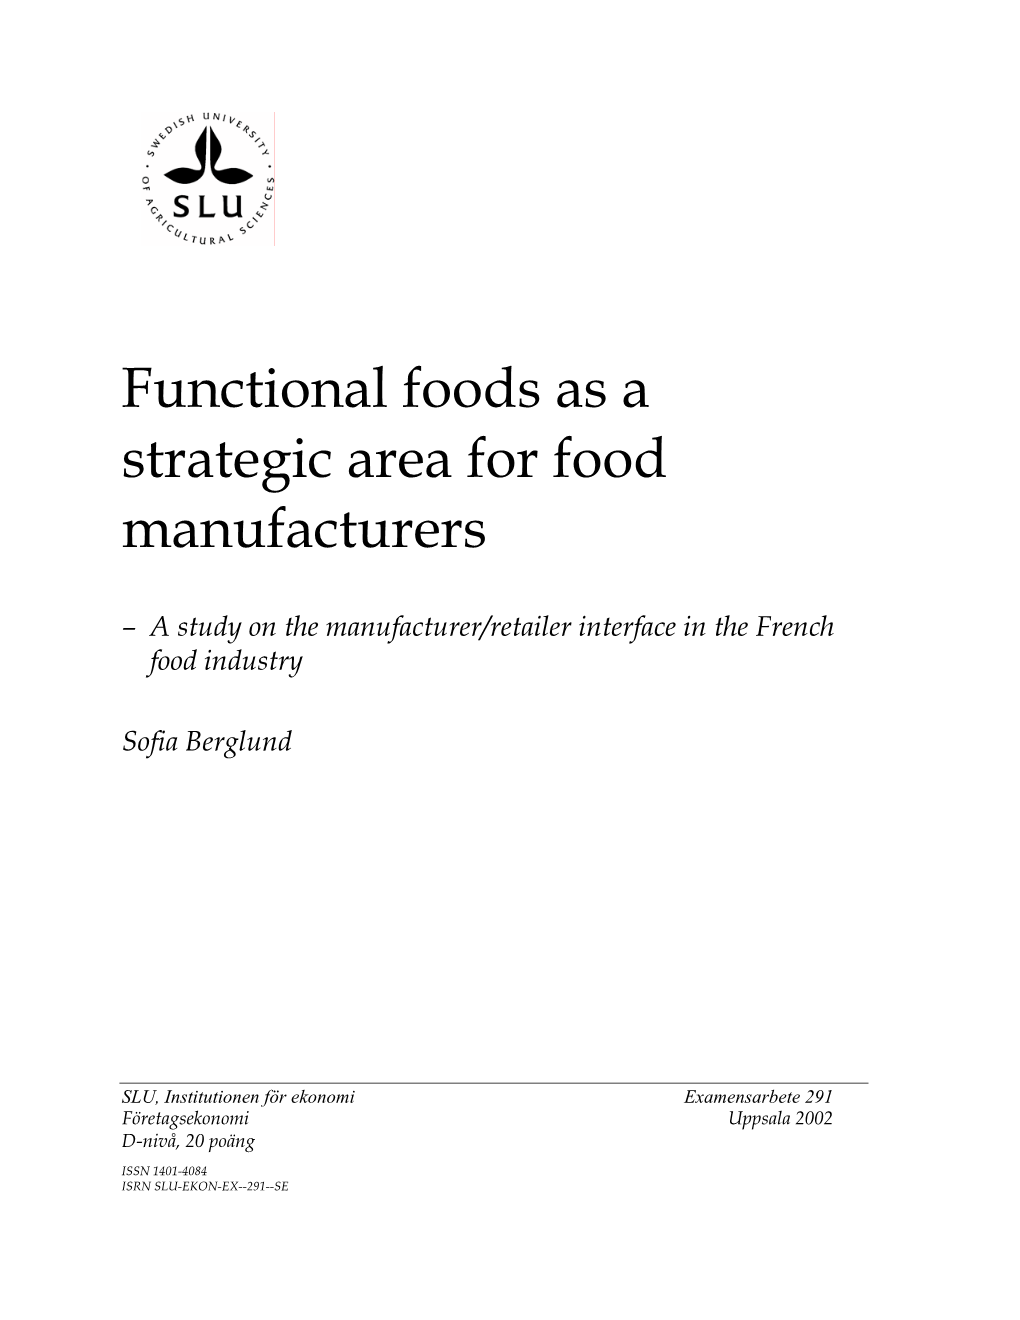 Functional Foods As a Strategic Area for Food Manufacturers